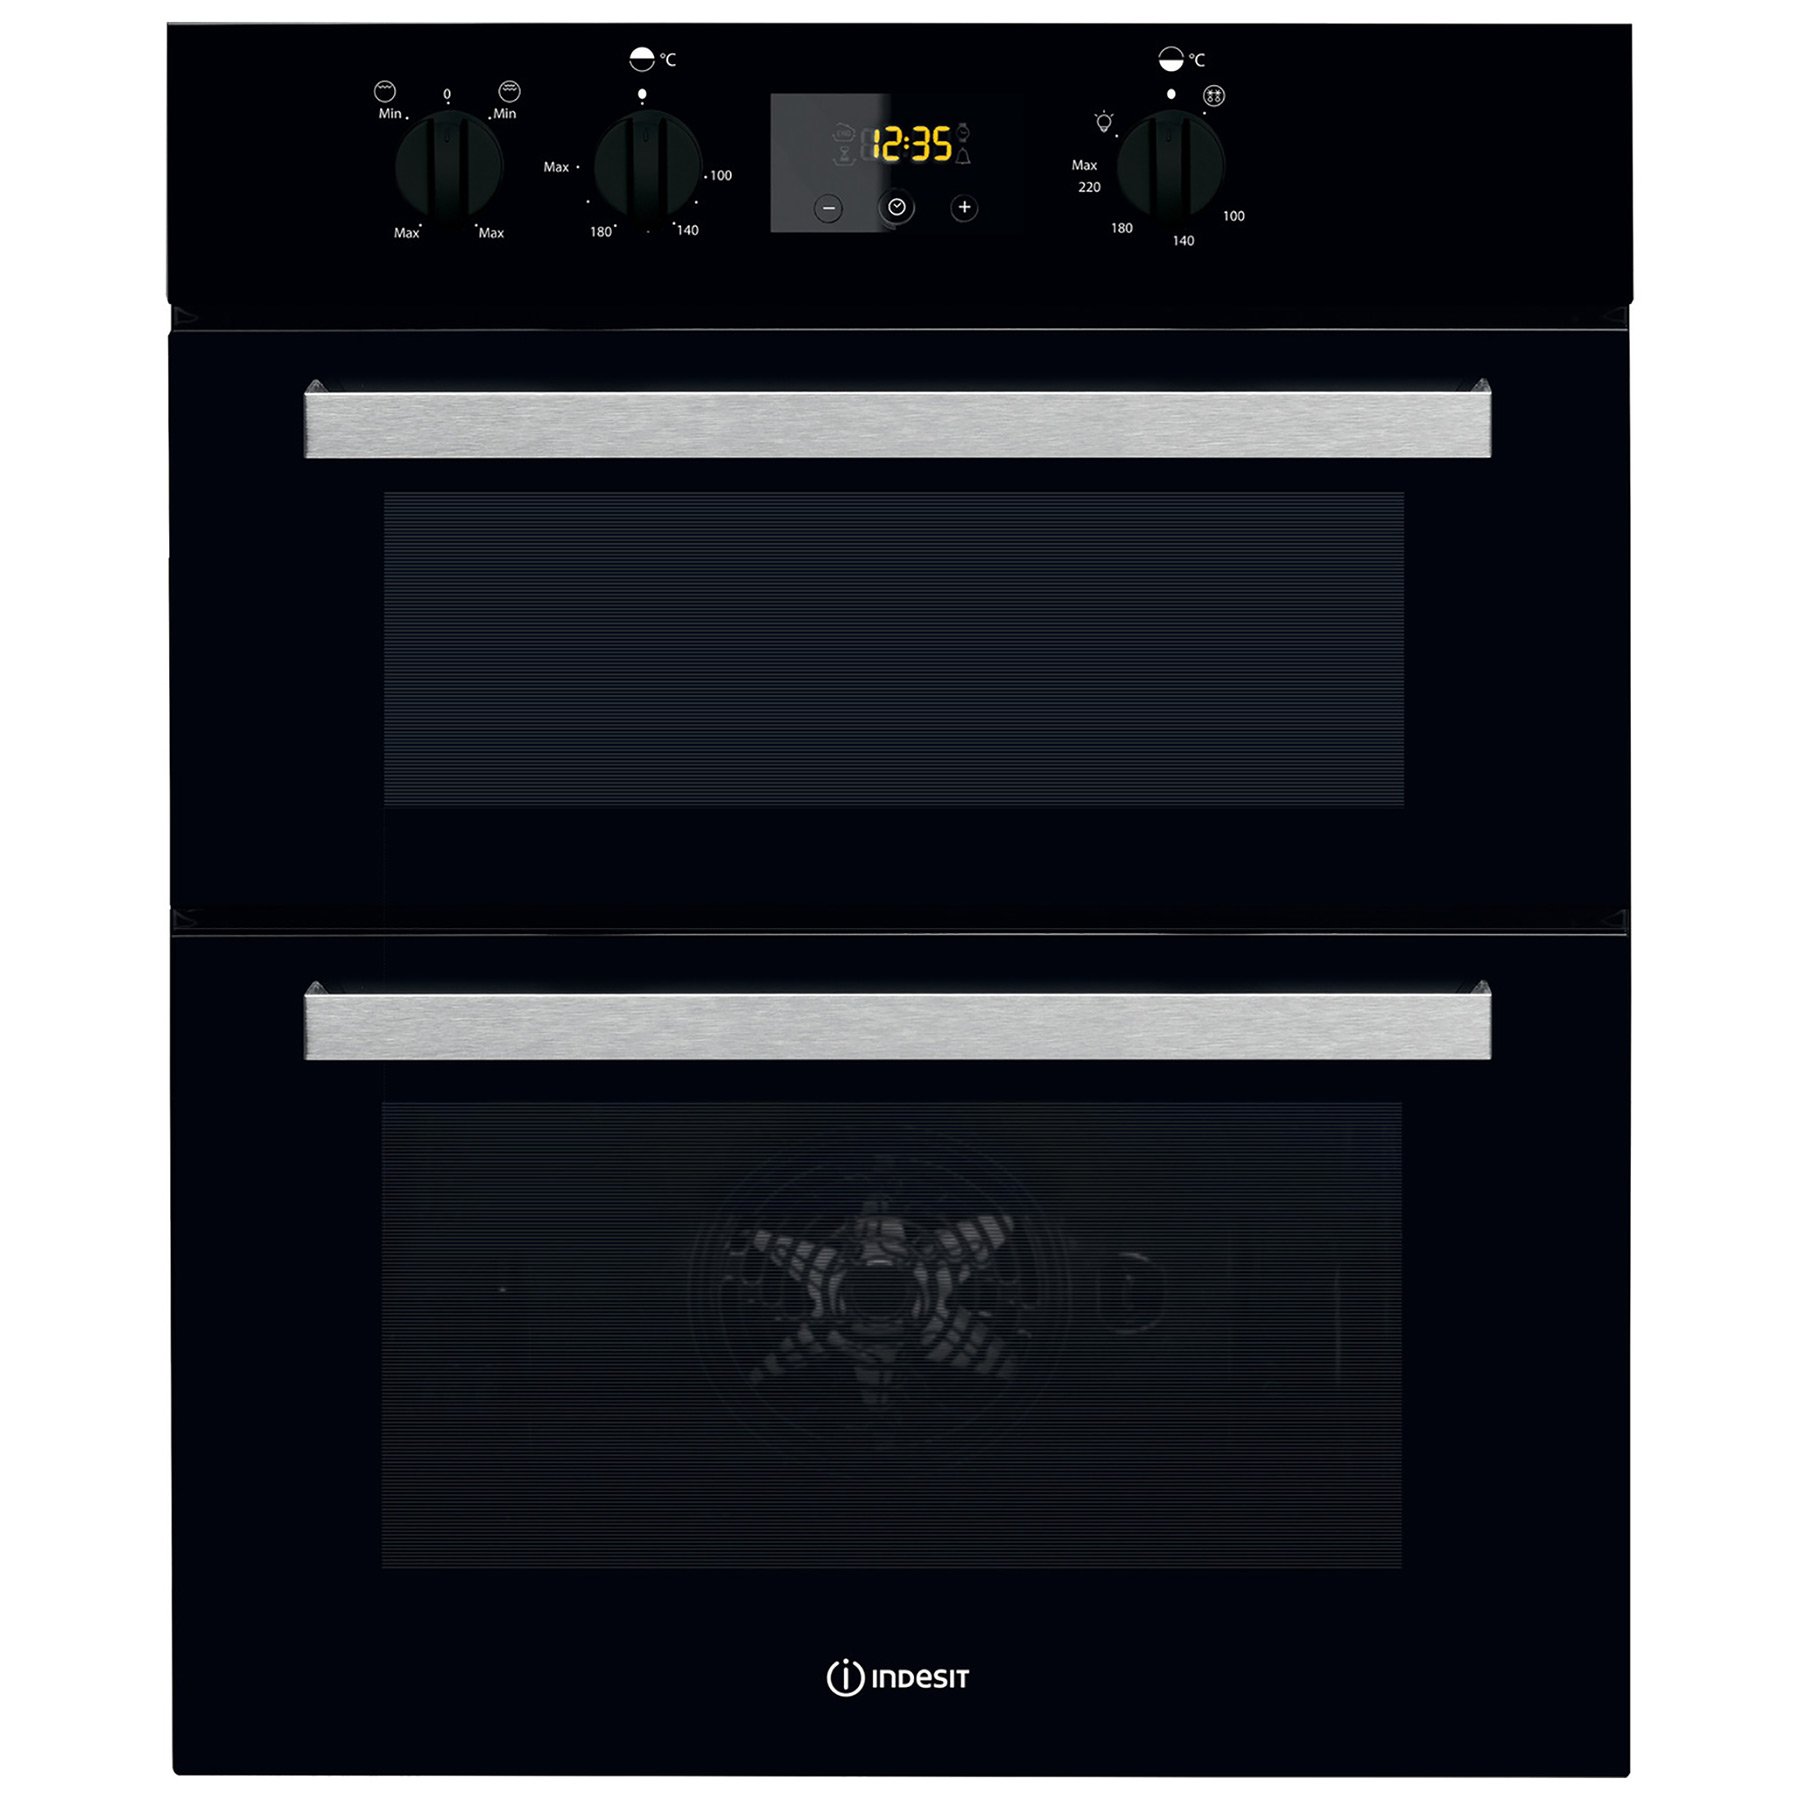 Image of Indesit IDU6340BL 60cm Built Under Double Electric Oven in Black